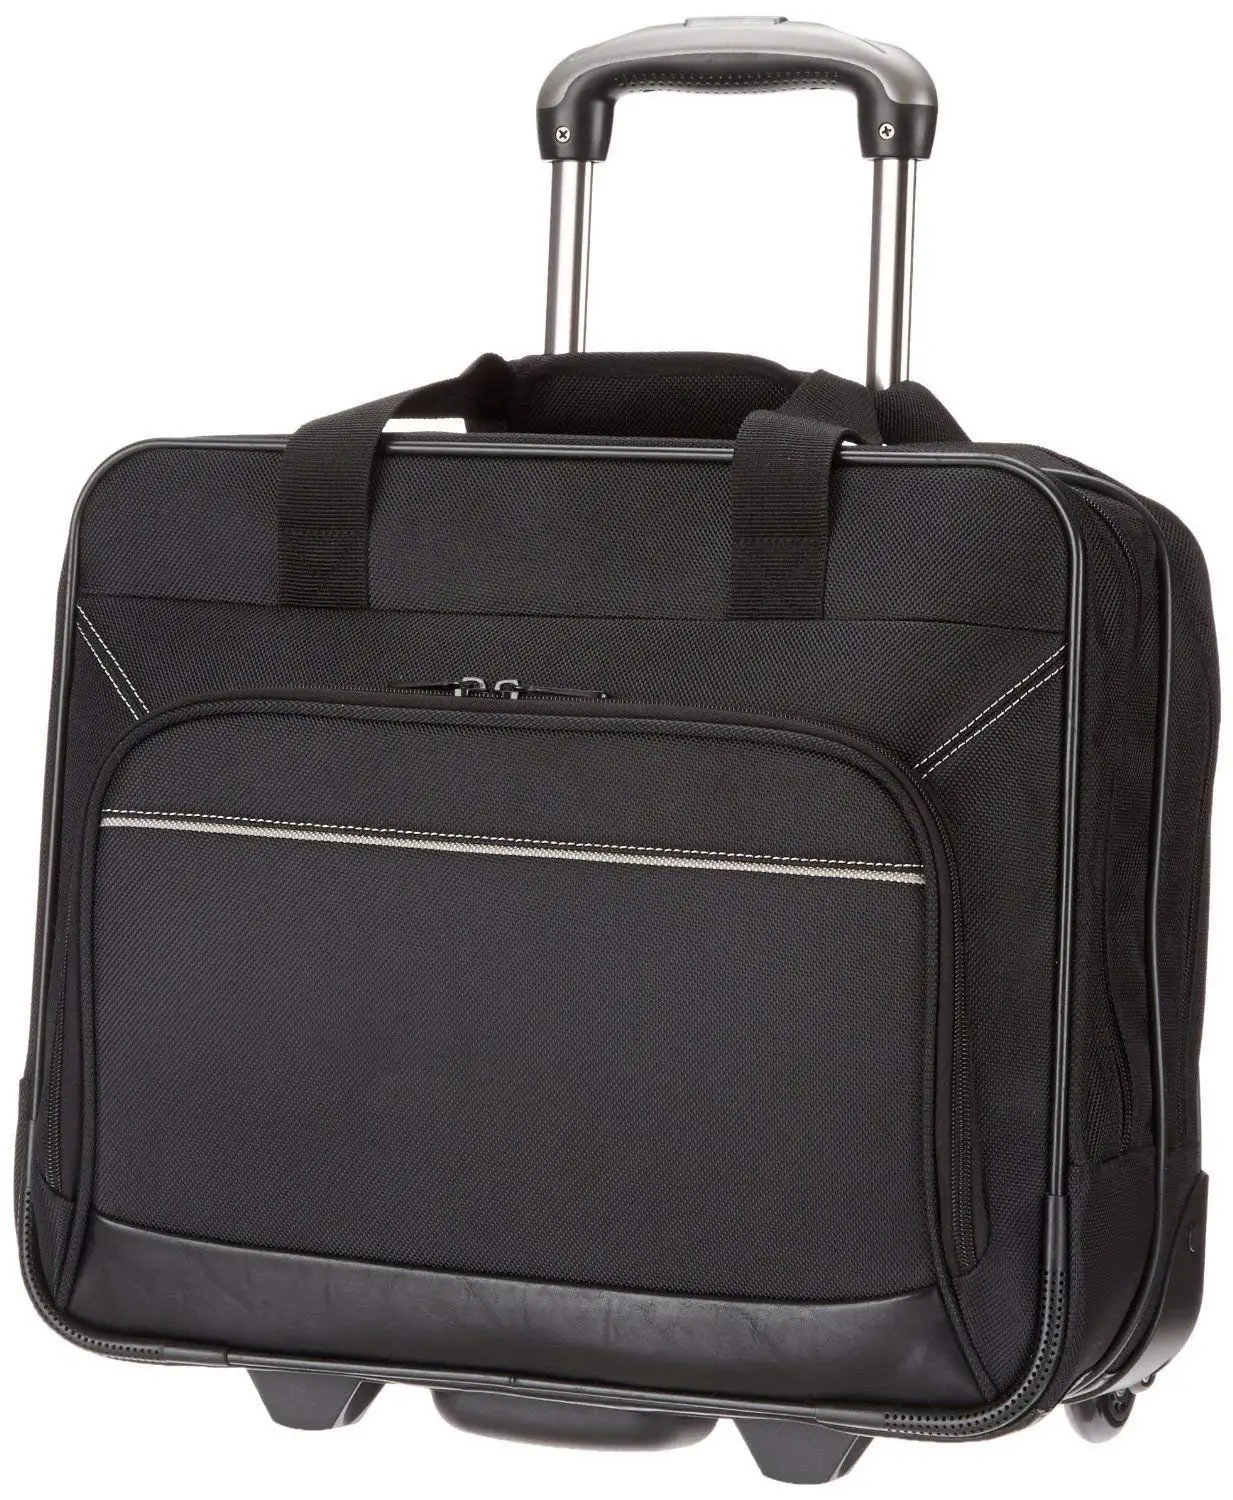 Cheap Best Rolling Laptop Bag For Travel, find Best Rolling Laptop Bag For Travel deals on line ...